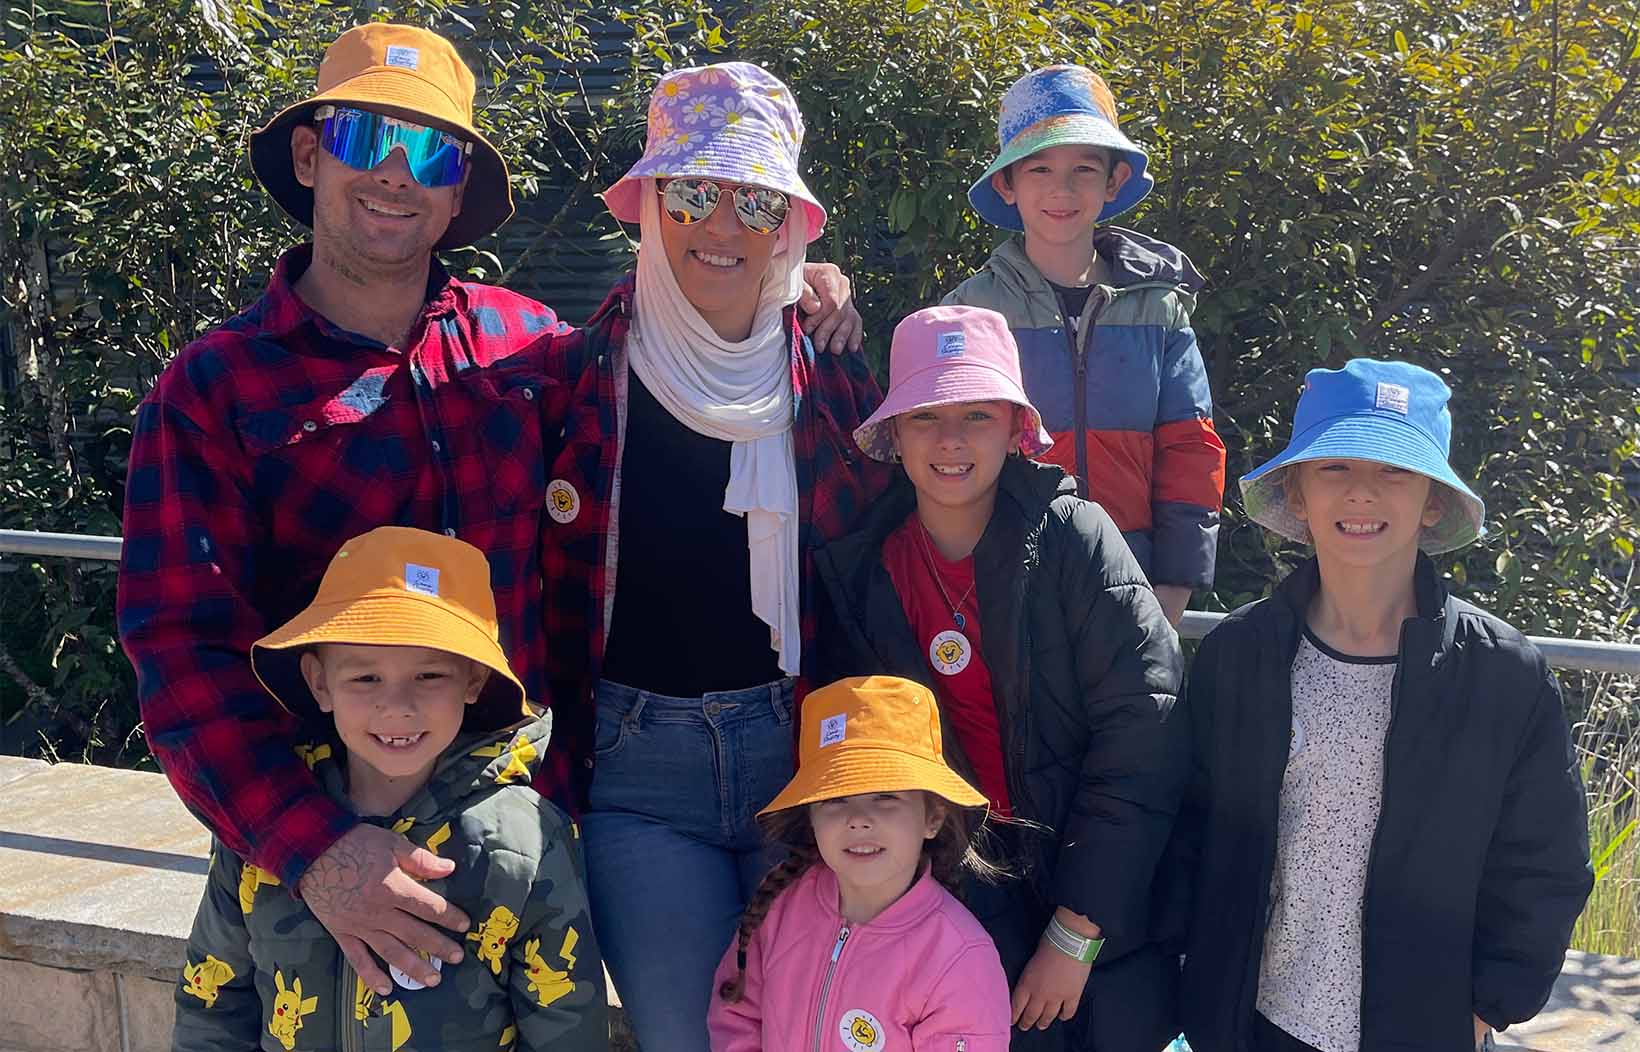 Camp Quality family all wearing bucket hats together while smiling at the camera.